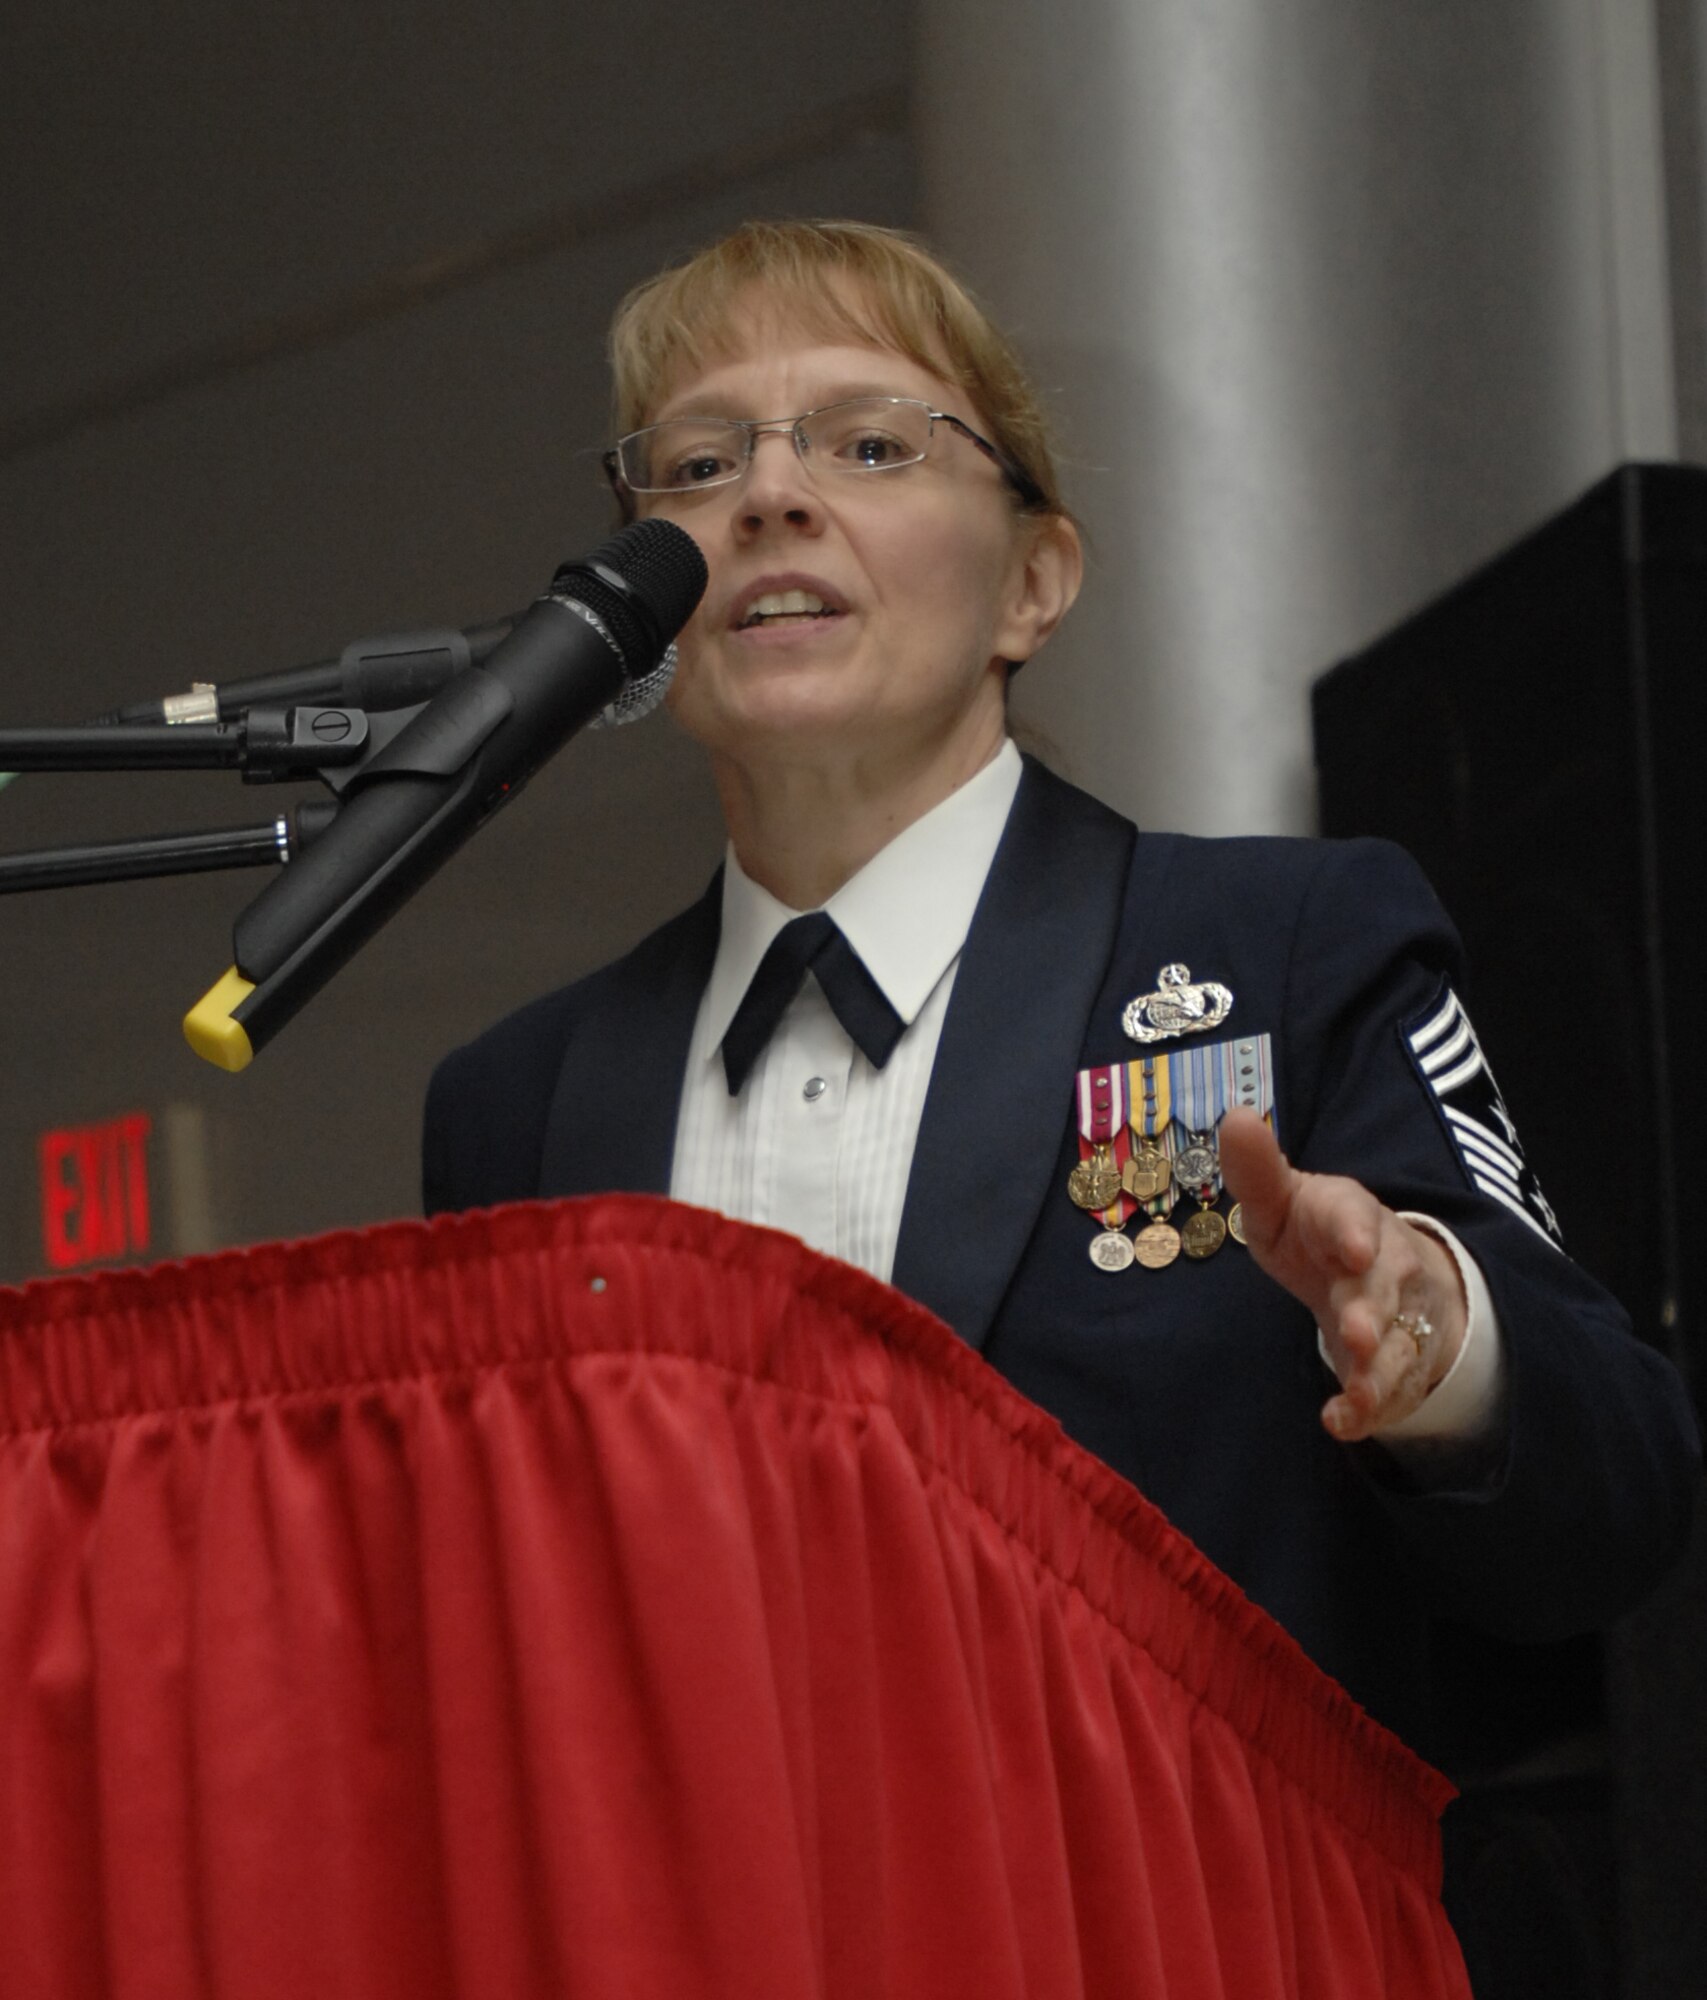 Chief Master Sgt. Pamela Derrow, United States Air Forces in Europe command chief master sgt., speaks to 39th Air Base Wing annual award nominees, friends and family members during the 39 ABW annual awards banquet, Jan. 30. The annual awards banquet is held to honor the members of the wing that stood-out above their peers during the 2008 calendar year. (U.S. Air Force photo/Senior Airman Benjamin Wilson)